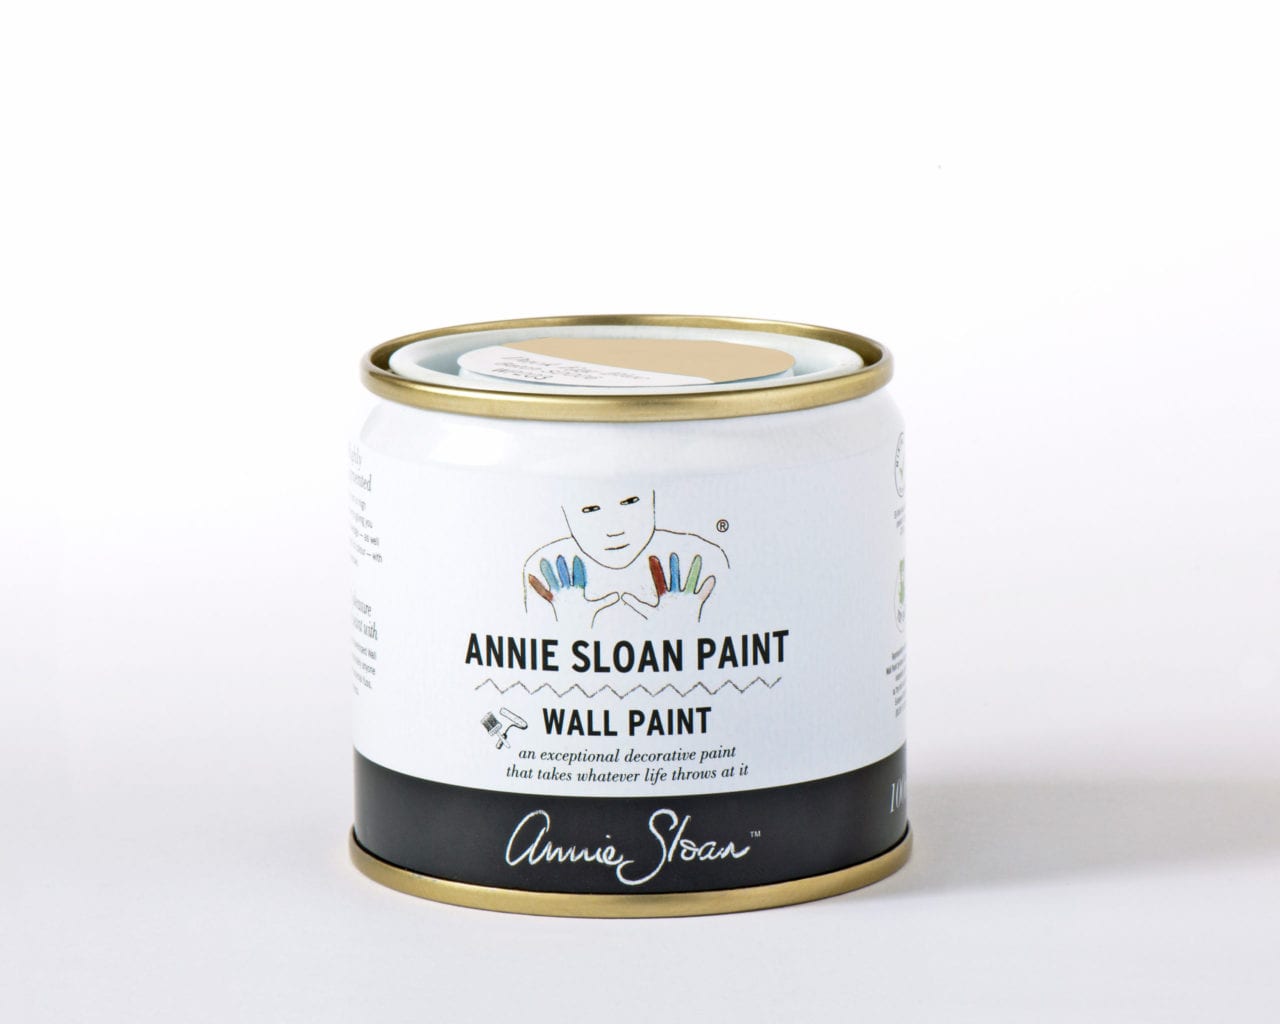 100ml tester tin of Wall Paint by Annie Sloan in Old Ochre, a soft warm neutral beige cream